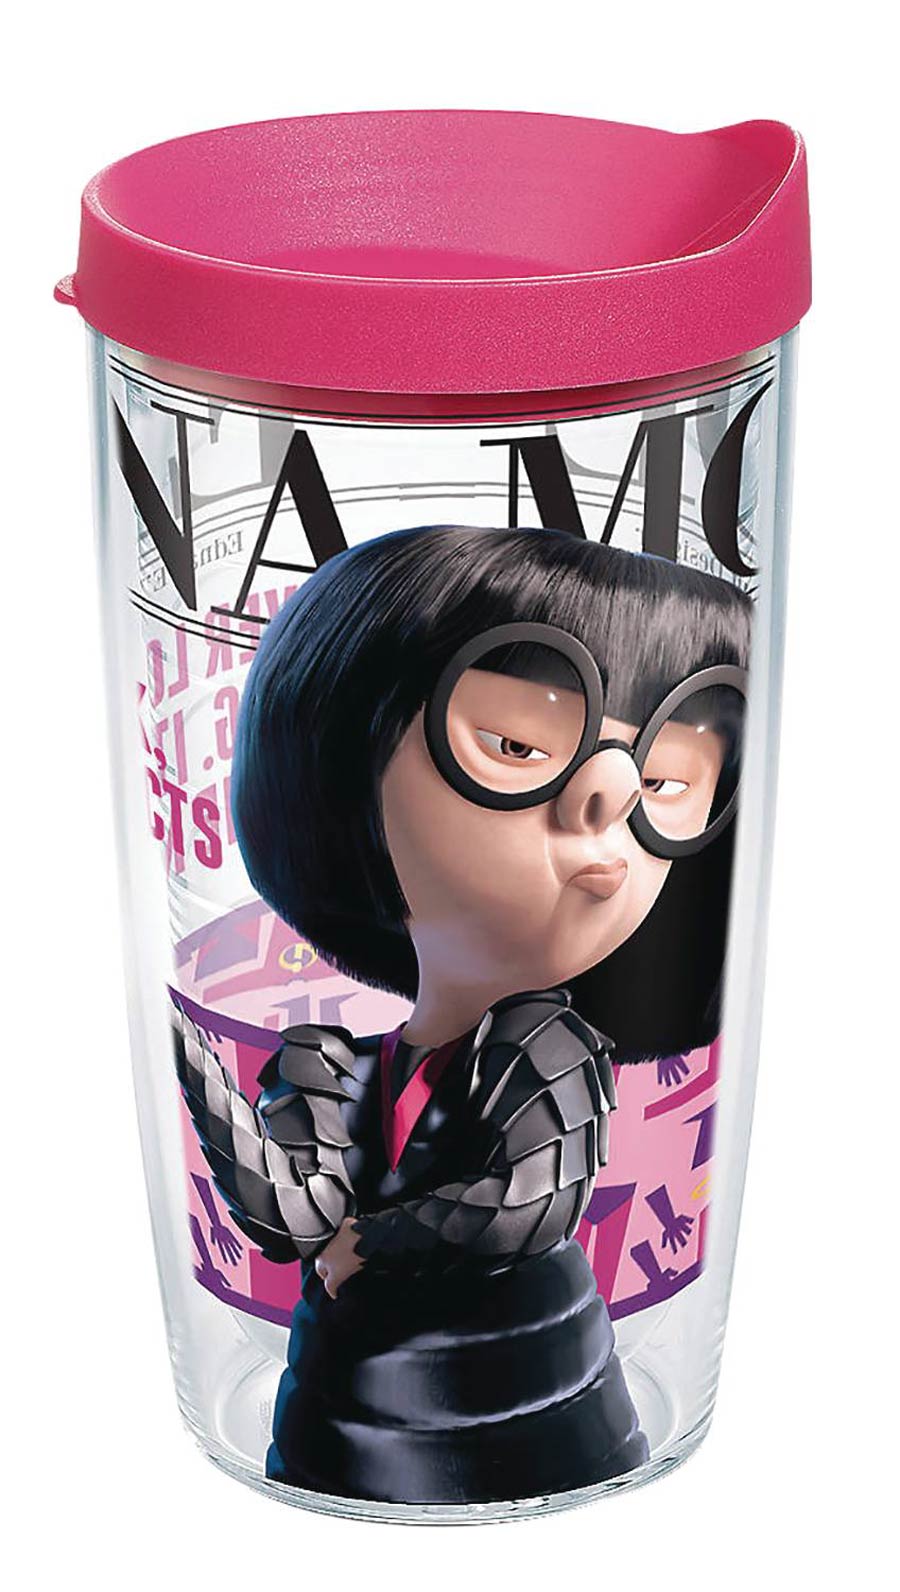 Incredibles 16-Ounce Tumbler - Edna Mode With Pink Lid